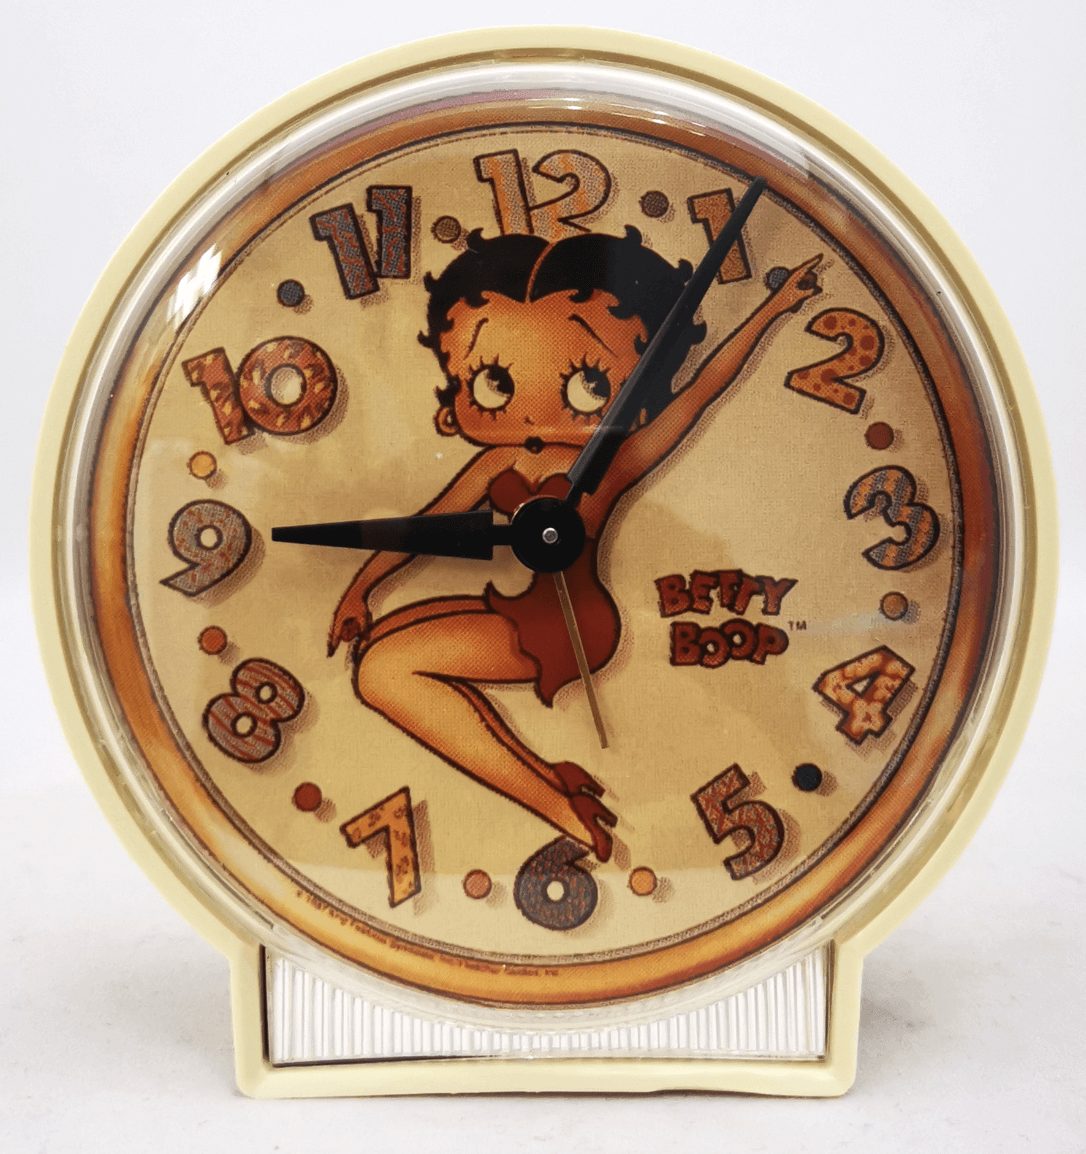 Betty Boop - After